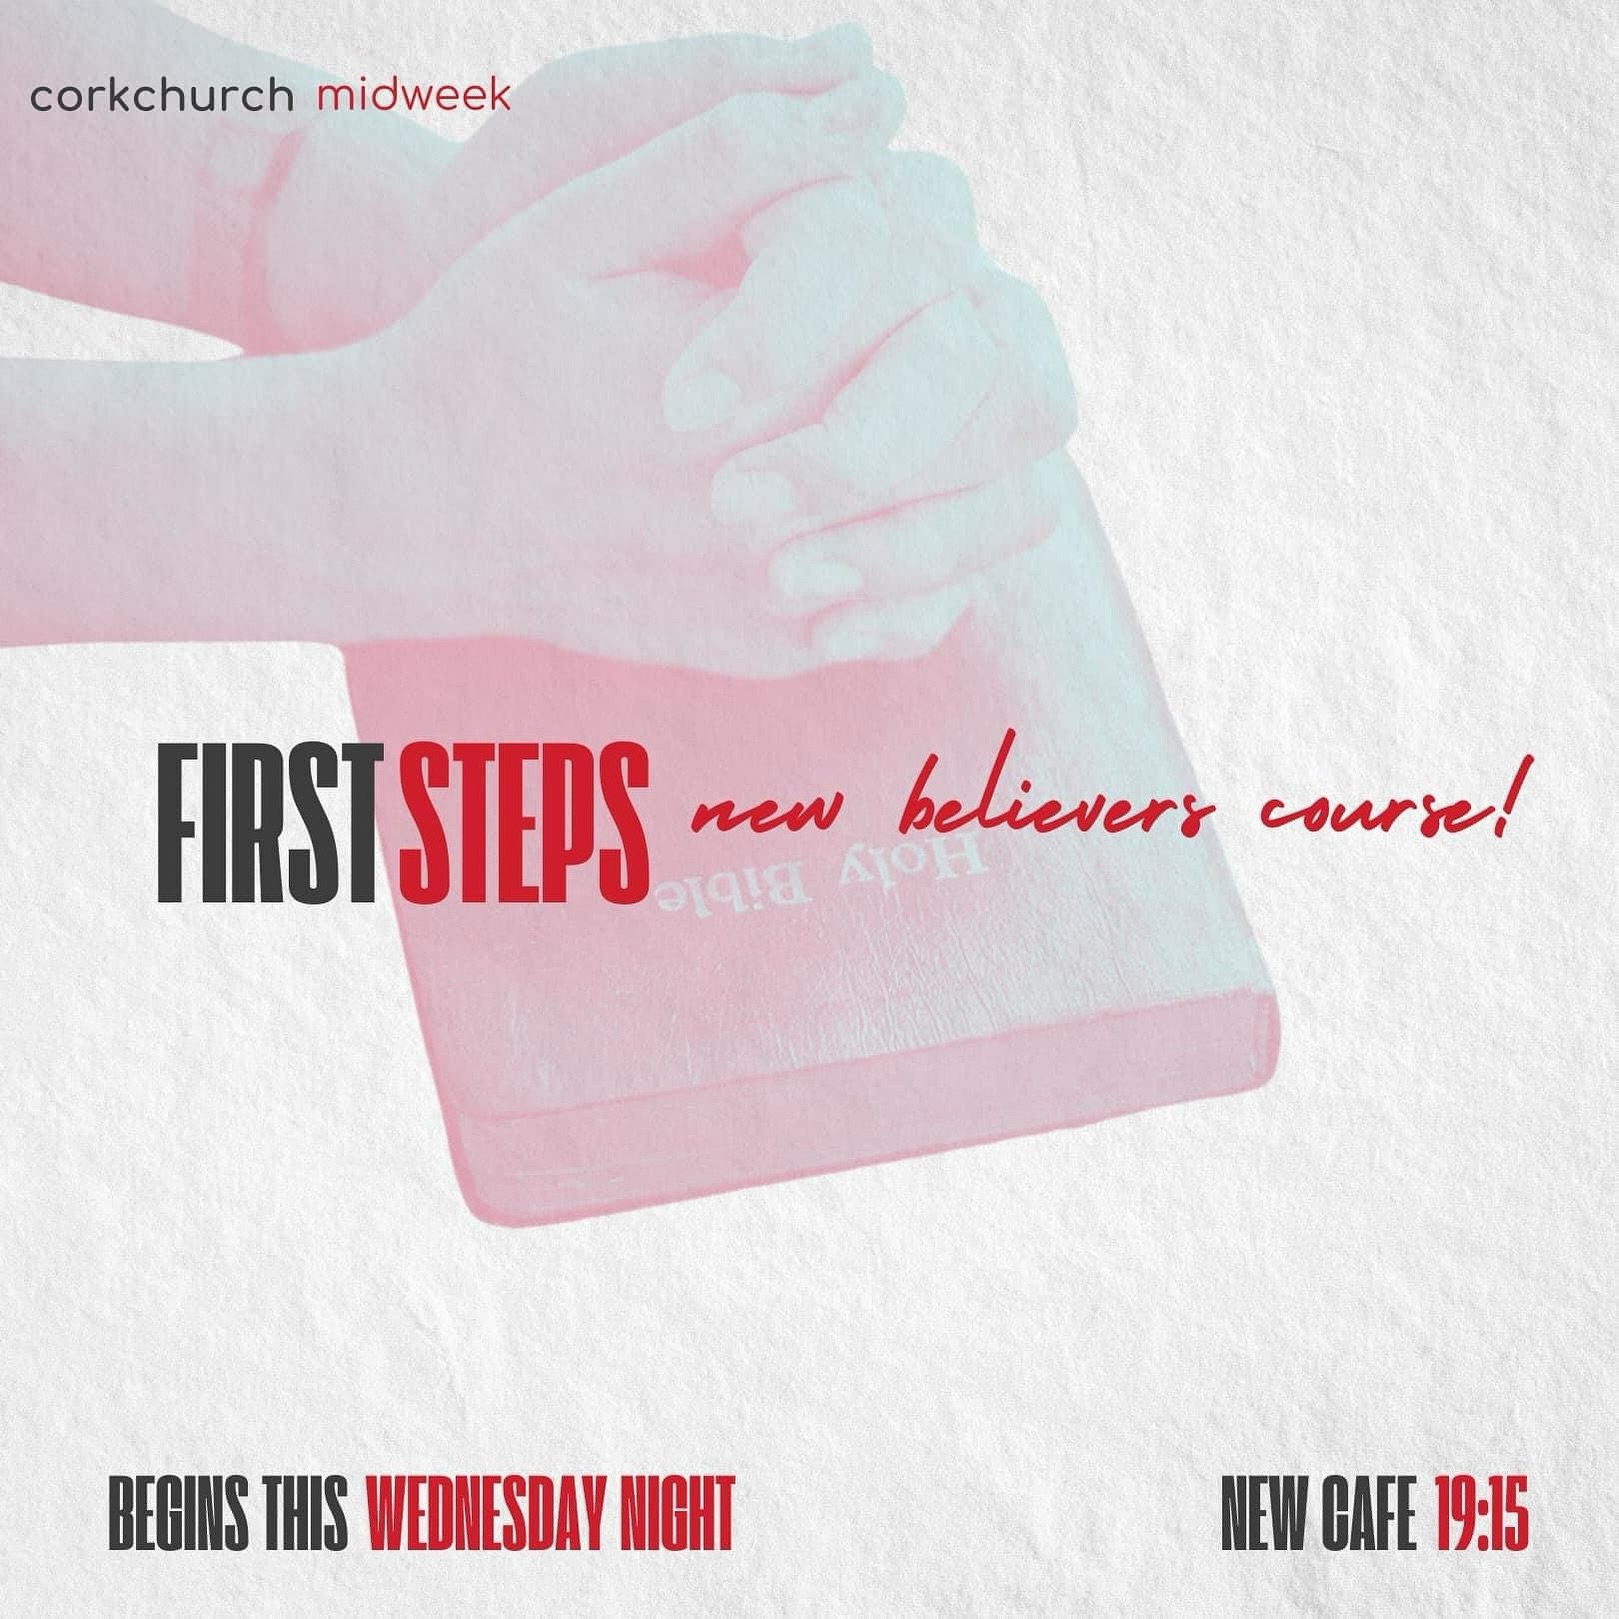 It&rsquo;s never too early to start growing! 

Our First Steps new believers course begins this Wednesday night alongside our midweek service at Cork Church!

We are excited to spend the next few Wednesday nights taking a look at some of the basic tr